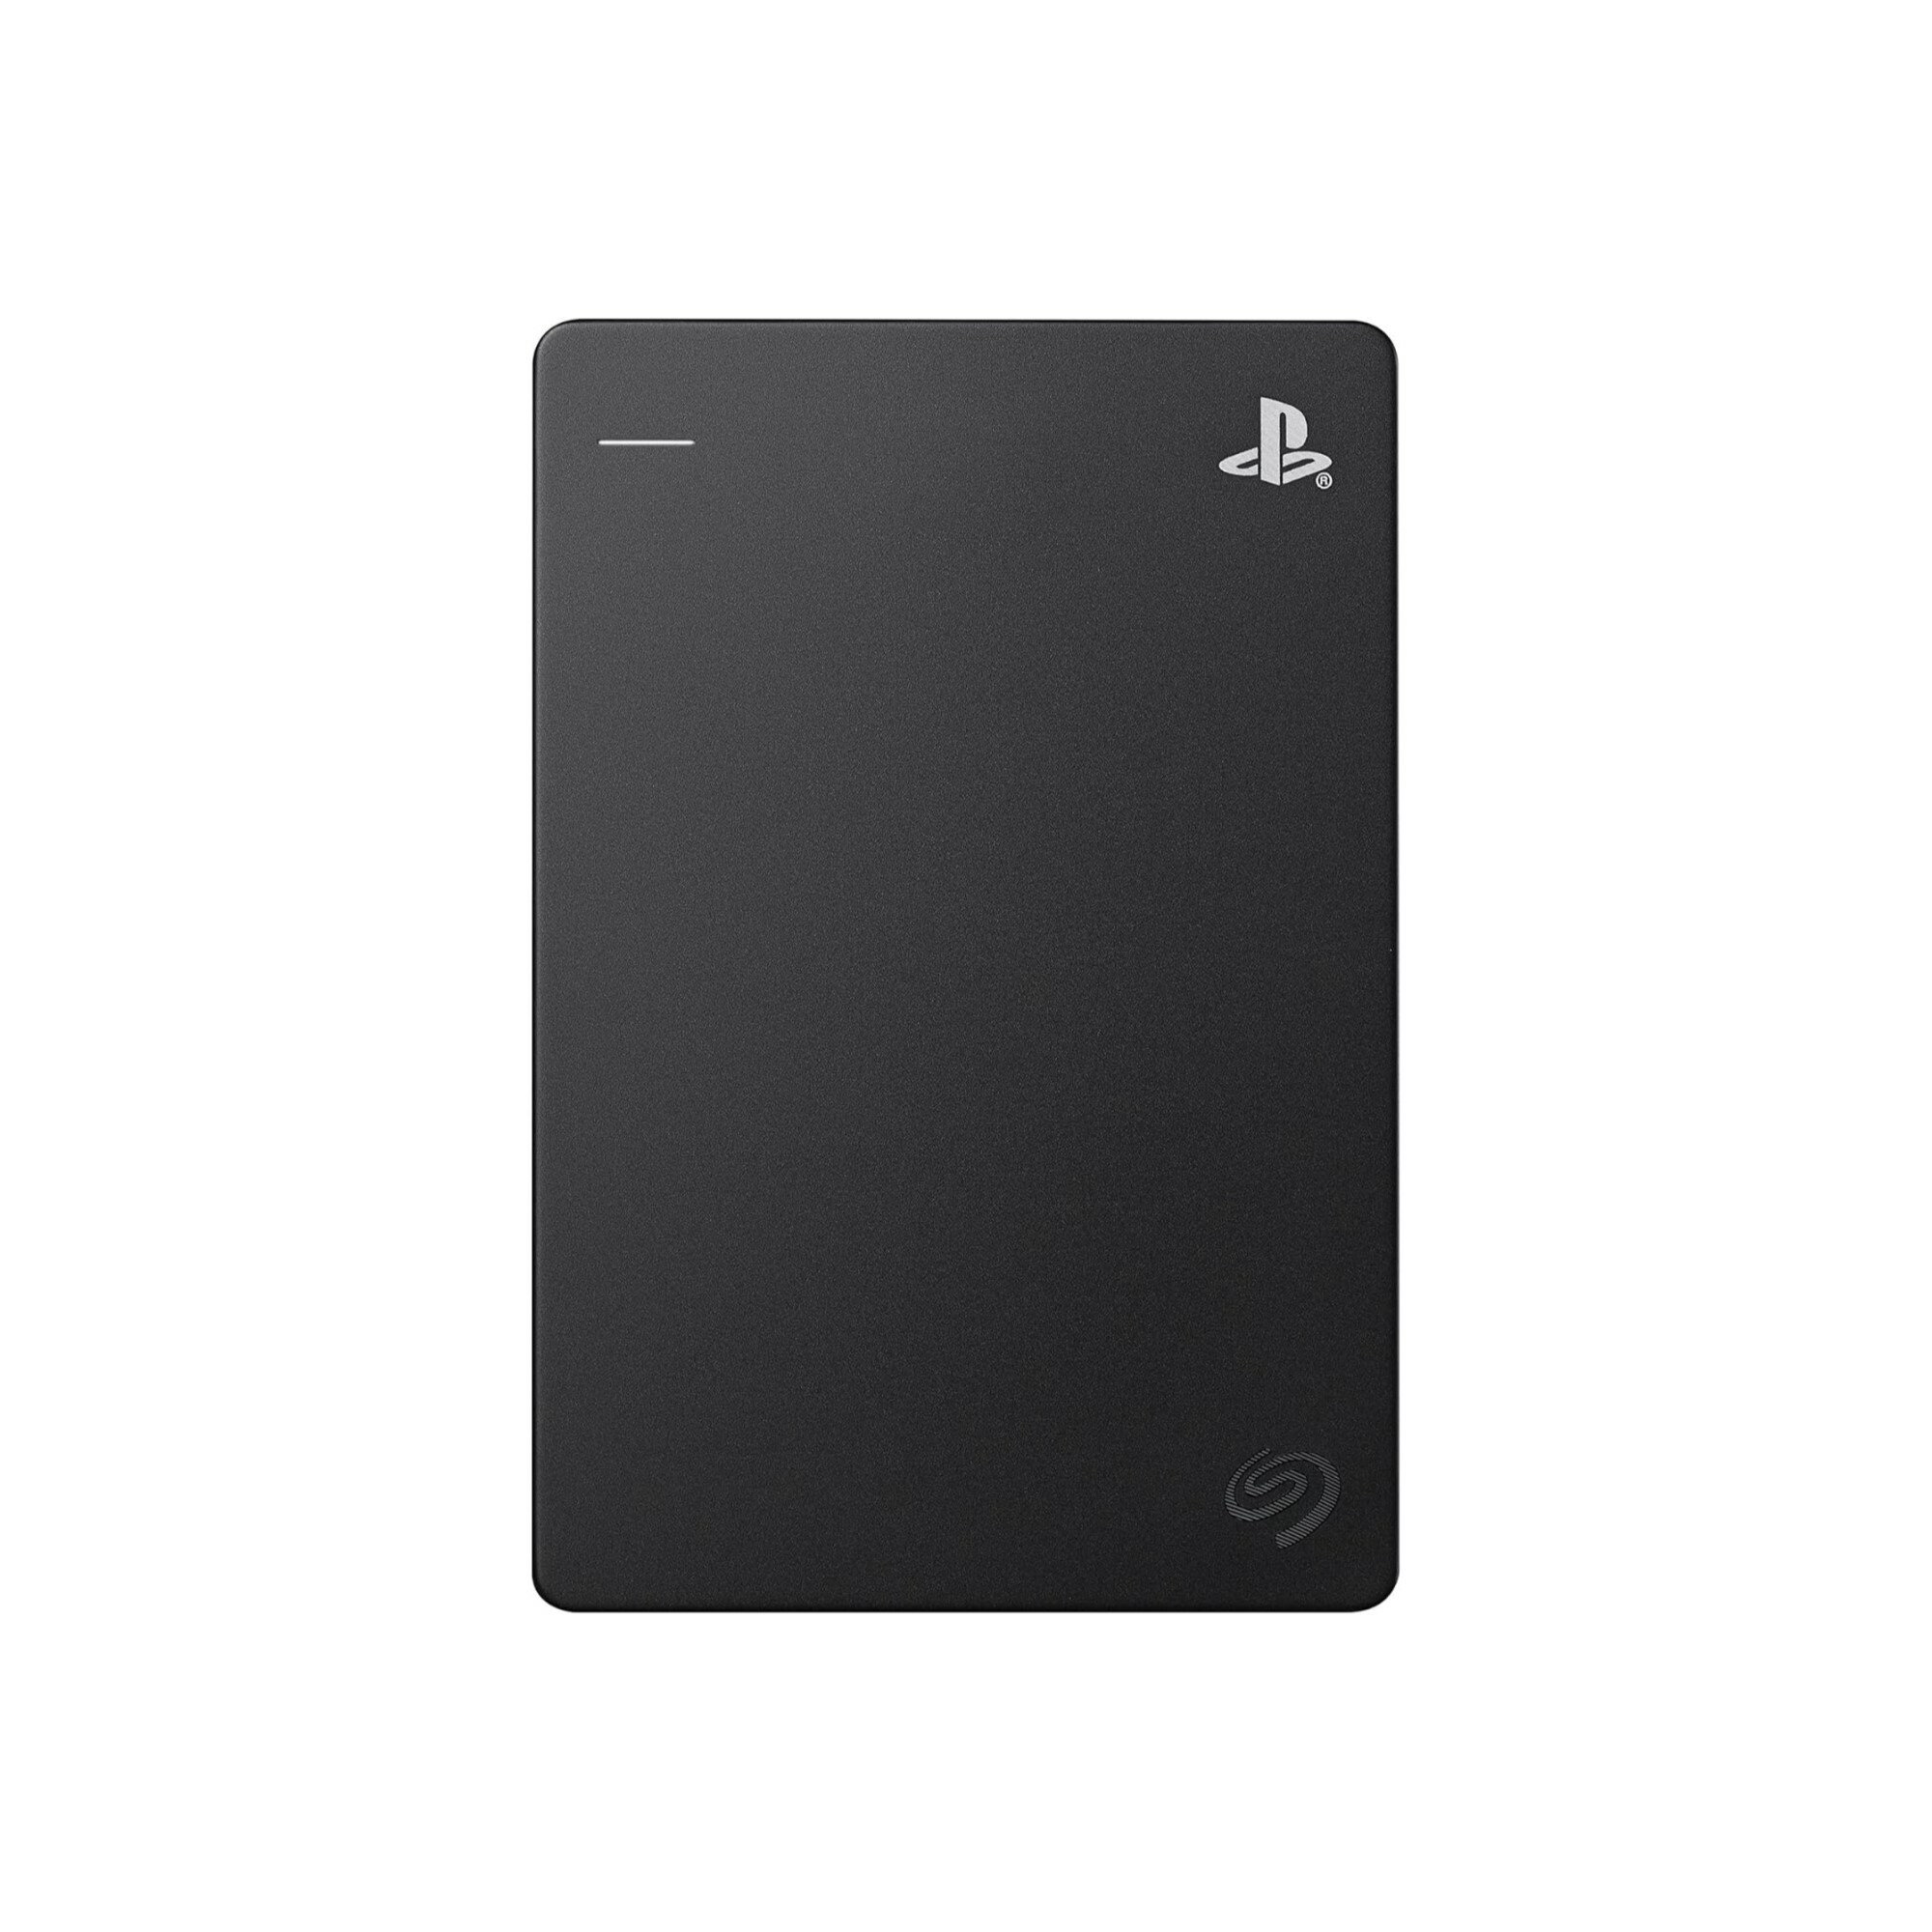 Seagate シーゲイト Gaming Portable HDD Play